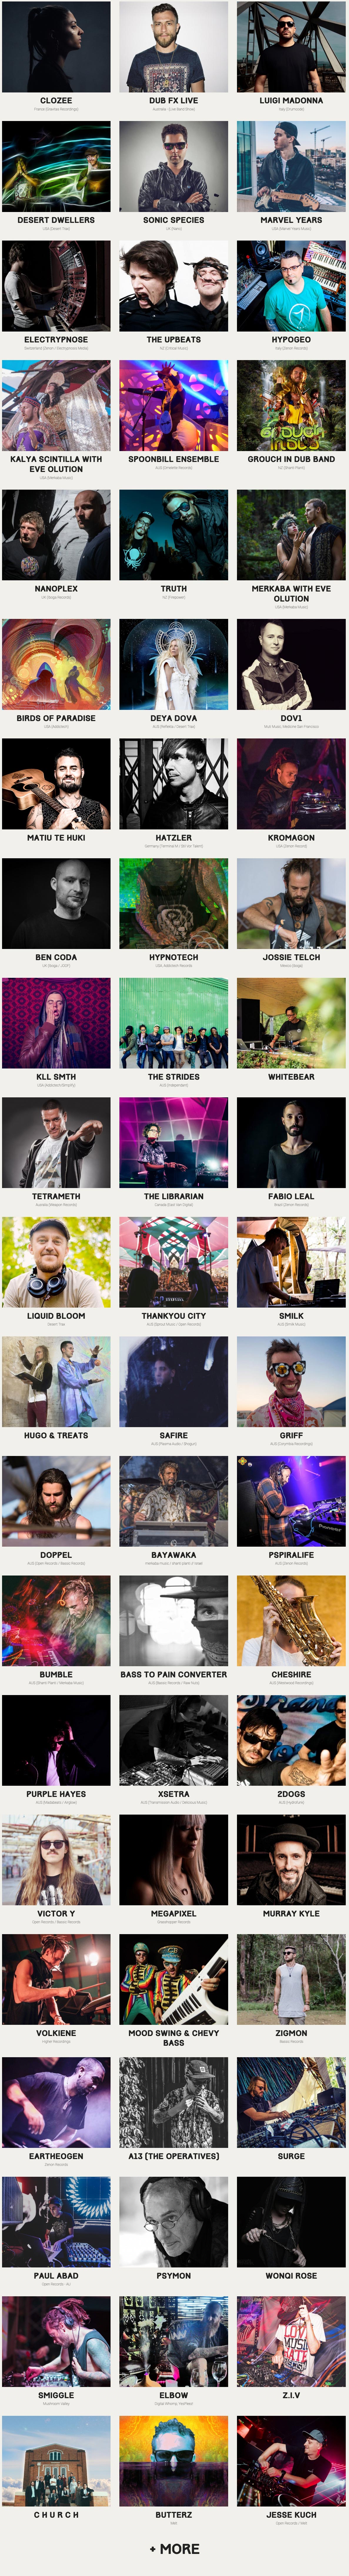 Earth-Frequency-Festival-2019-lineup-oz-edm